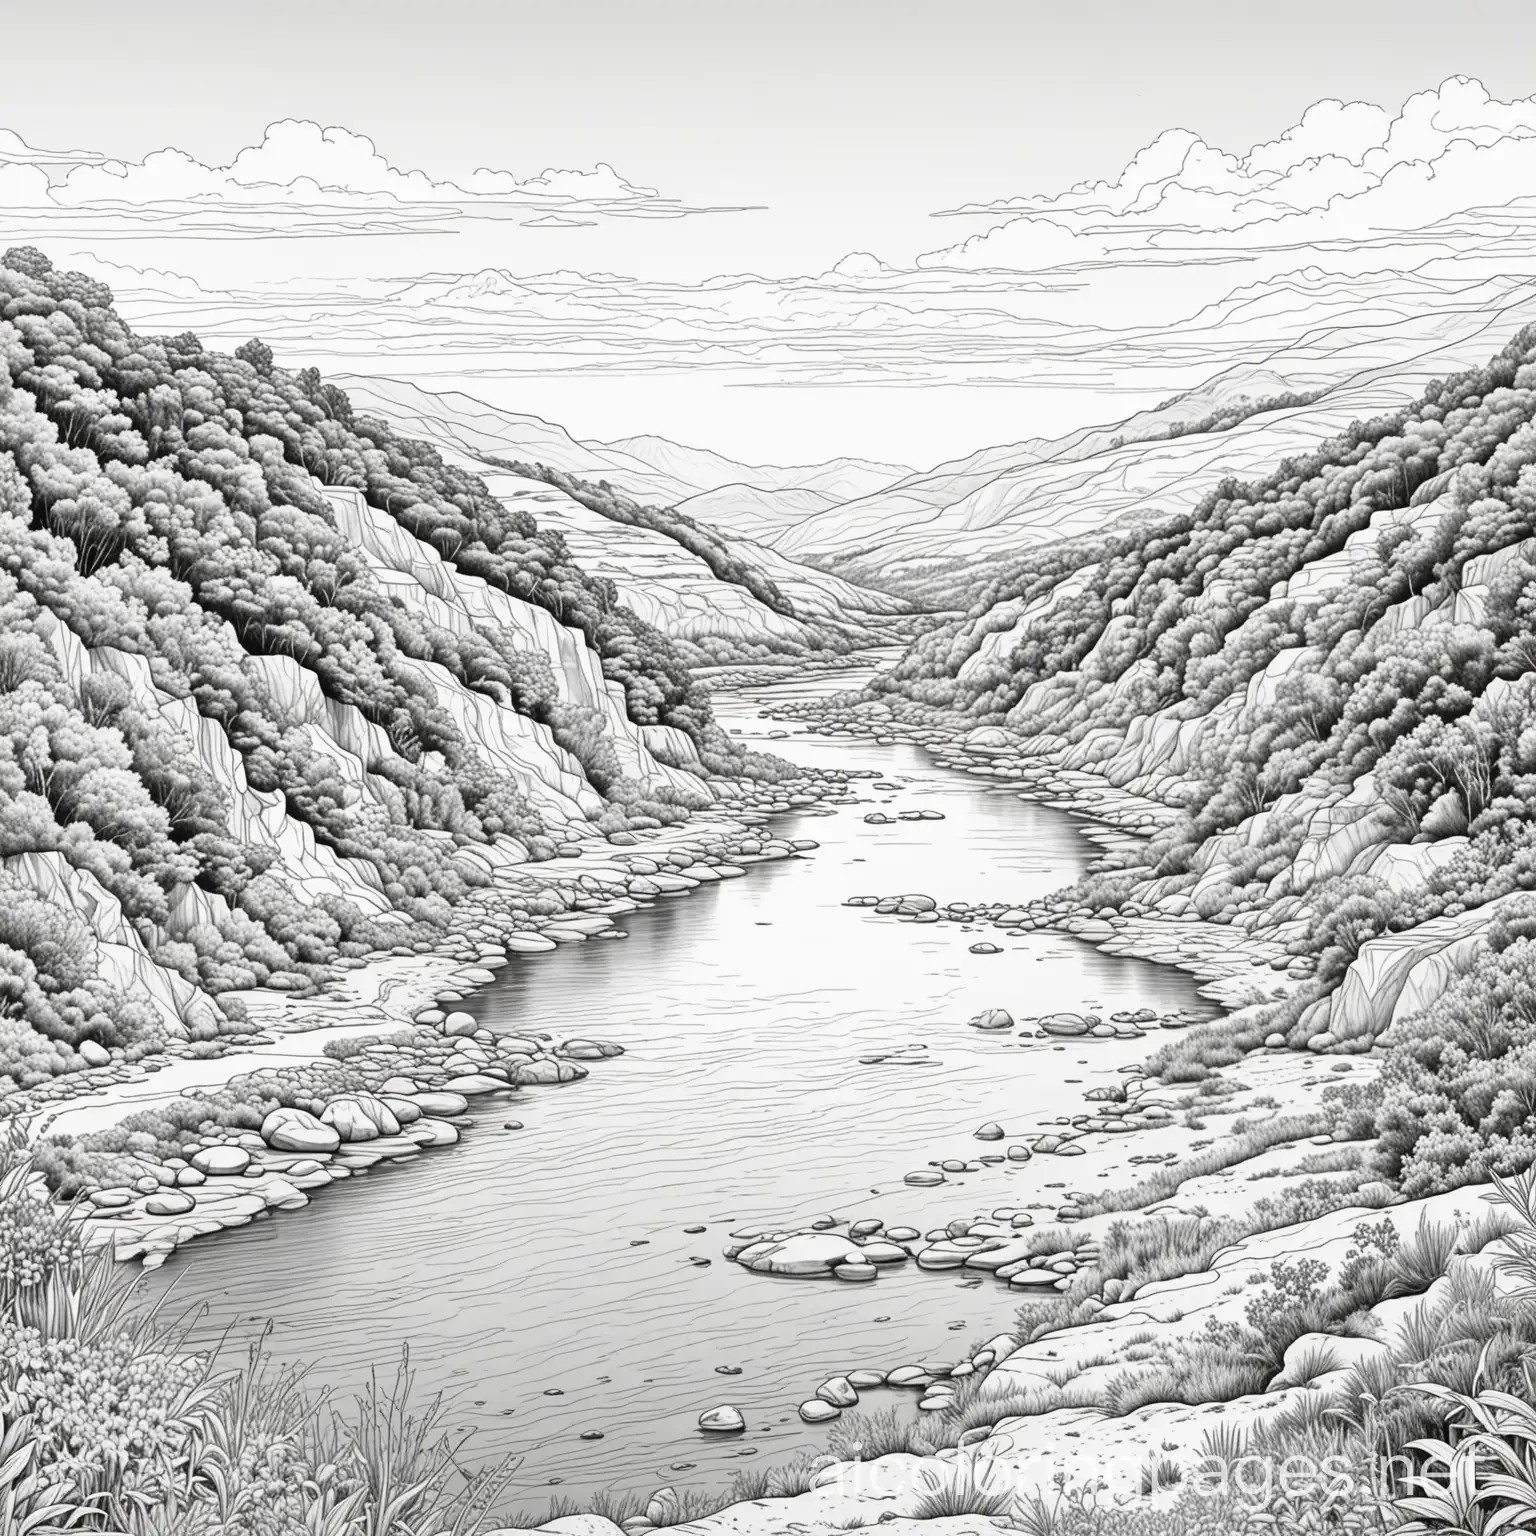 manawatu river, Coloring Page, black and white, line art, white background, Simplicity, Ample White Space. The background of the coloring page is plain white to make it easy for young children to color within the lines. The outlines of all the subjects are easy to distinguish, making it simple for kids to color without too much difficulty